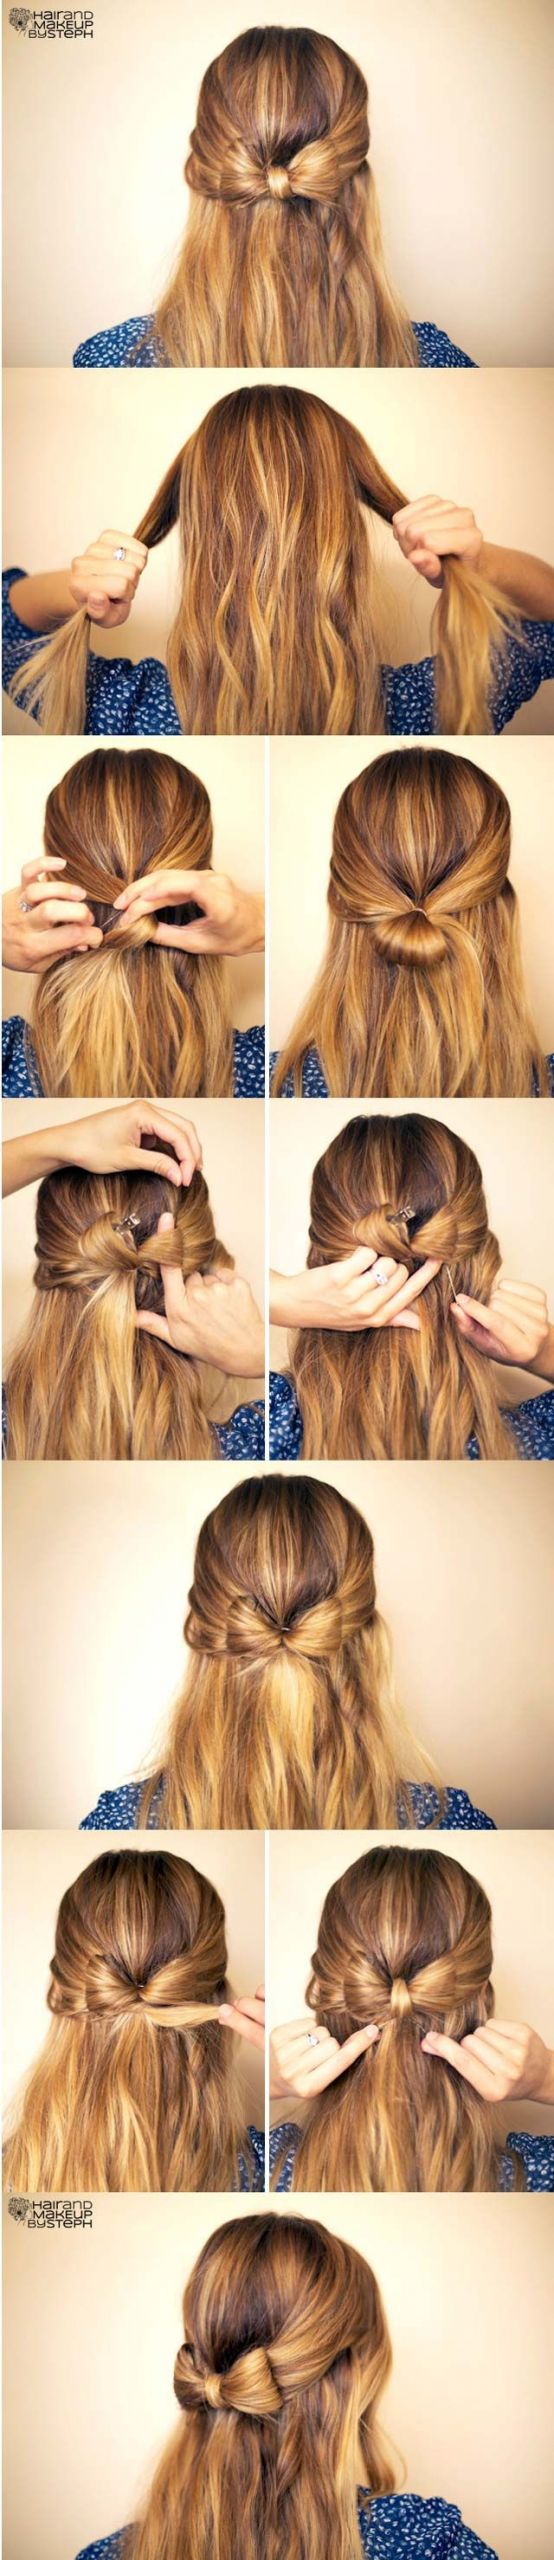 Easy Hairstyle Tutorials
 15 Super Easy Hairstyles With Tutorials Pretty Designs